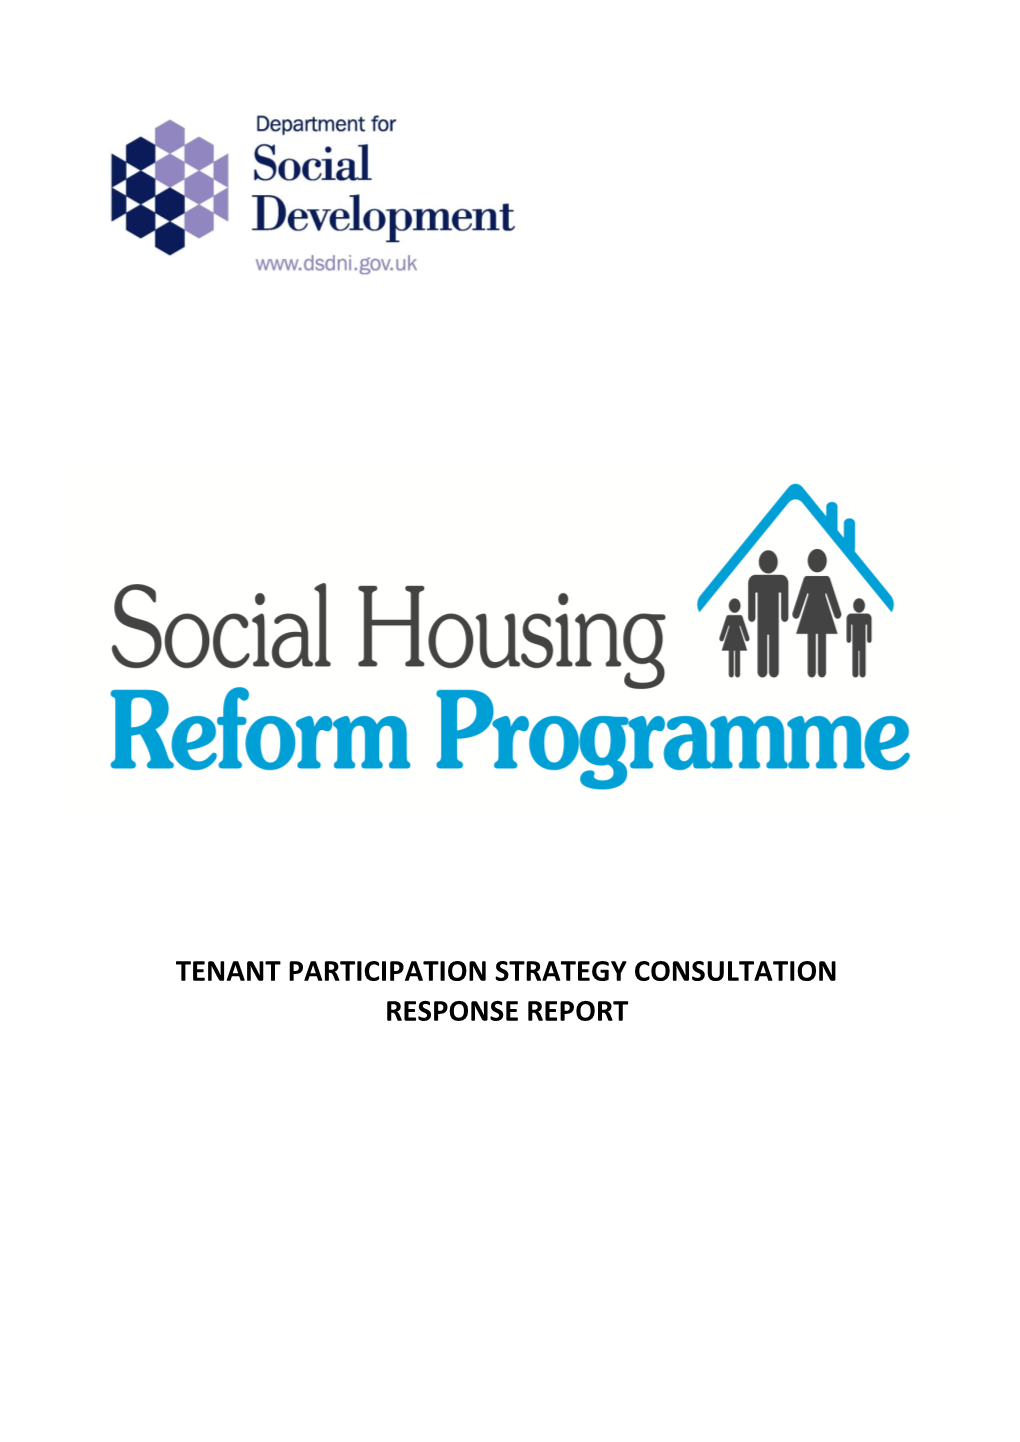 Tenant Participation Strategy Consultation Response Report